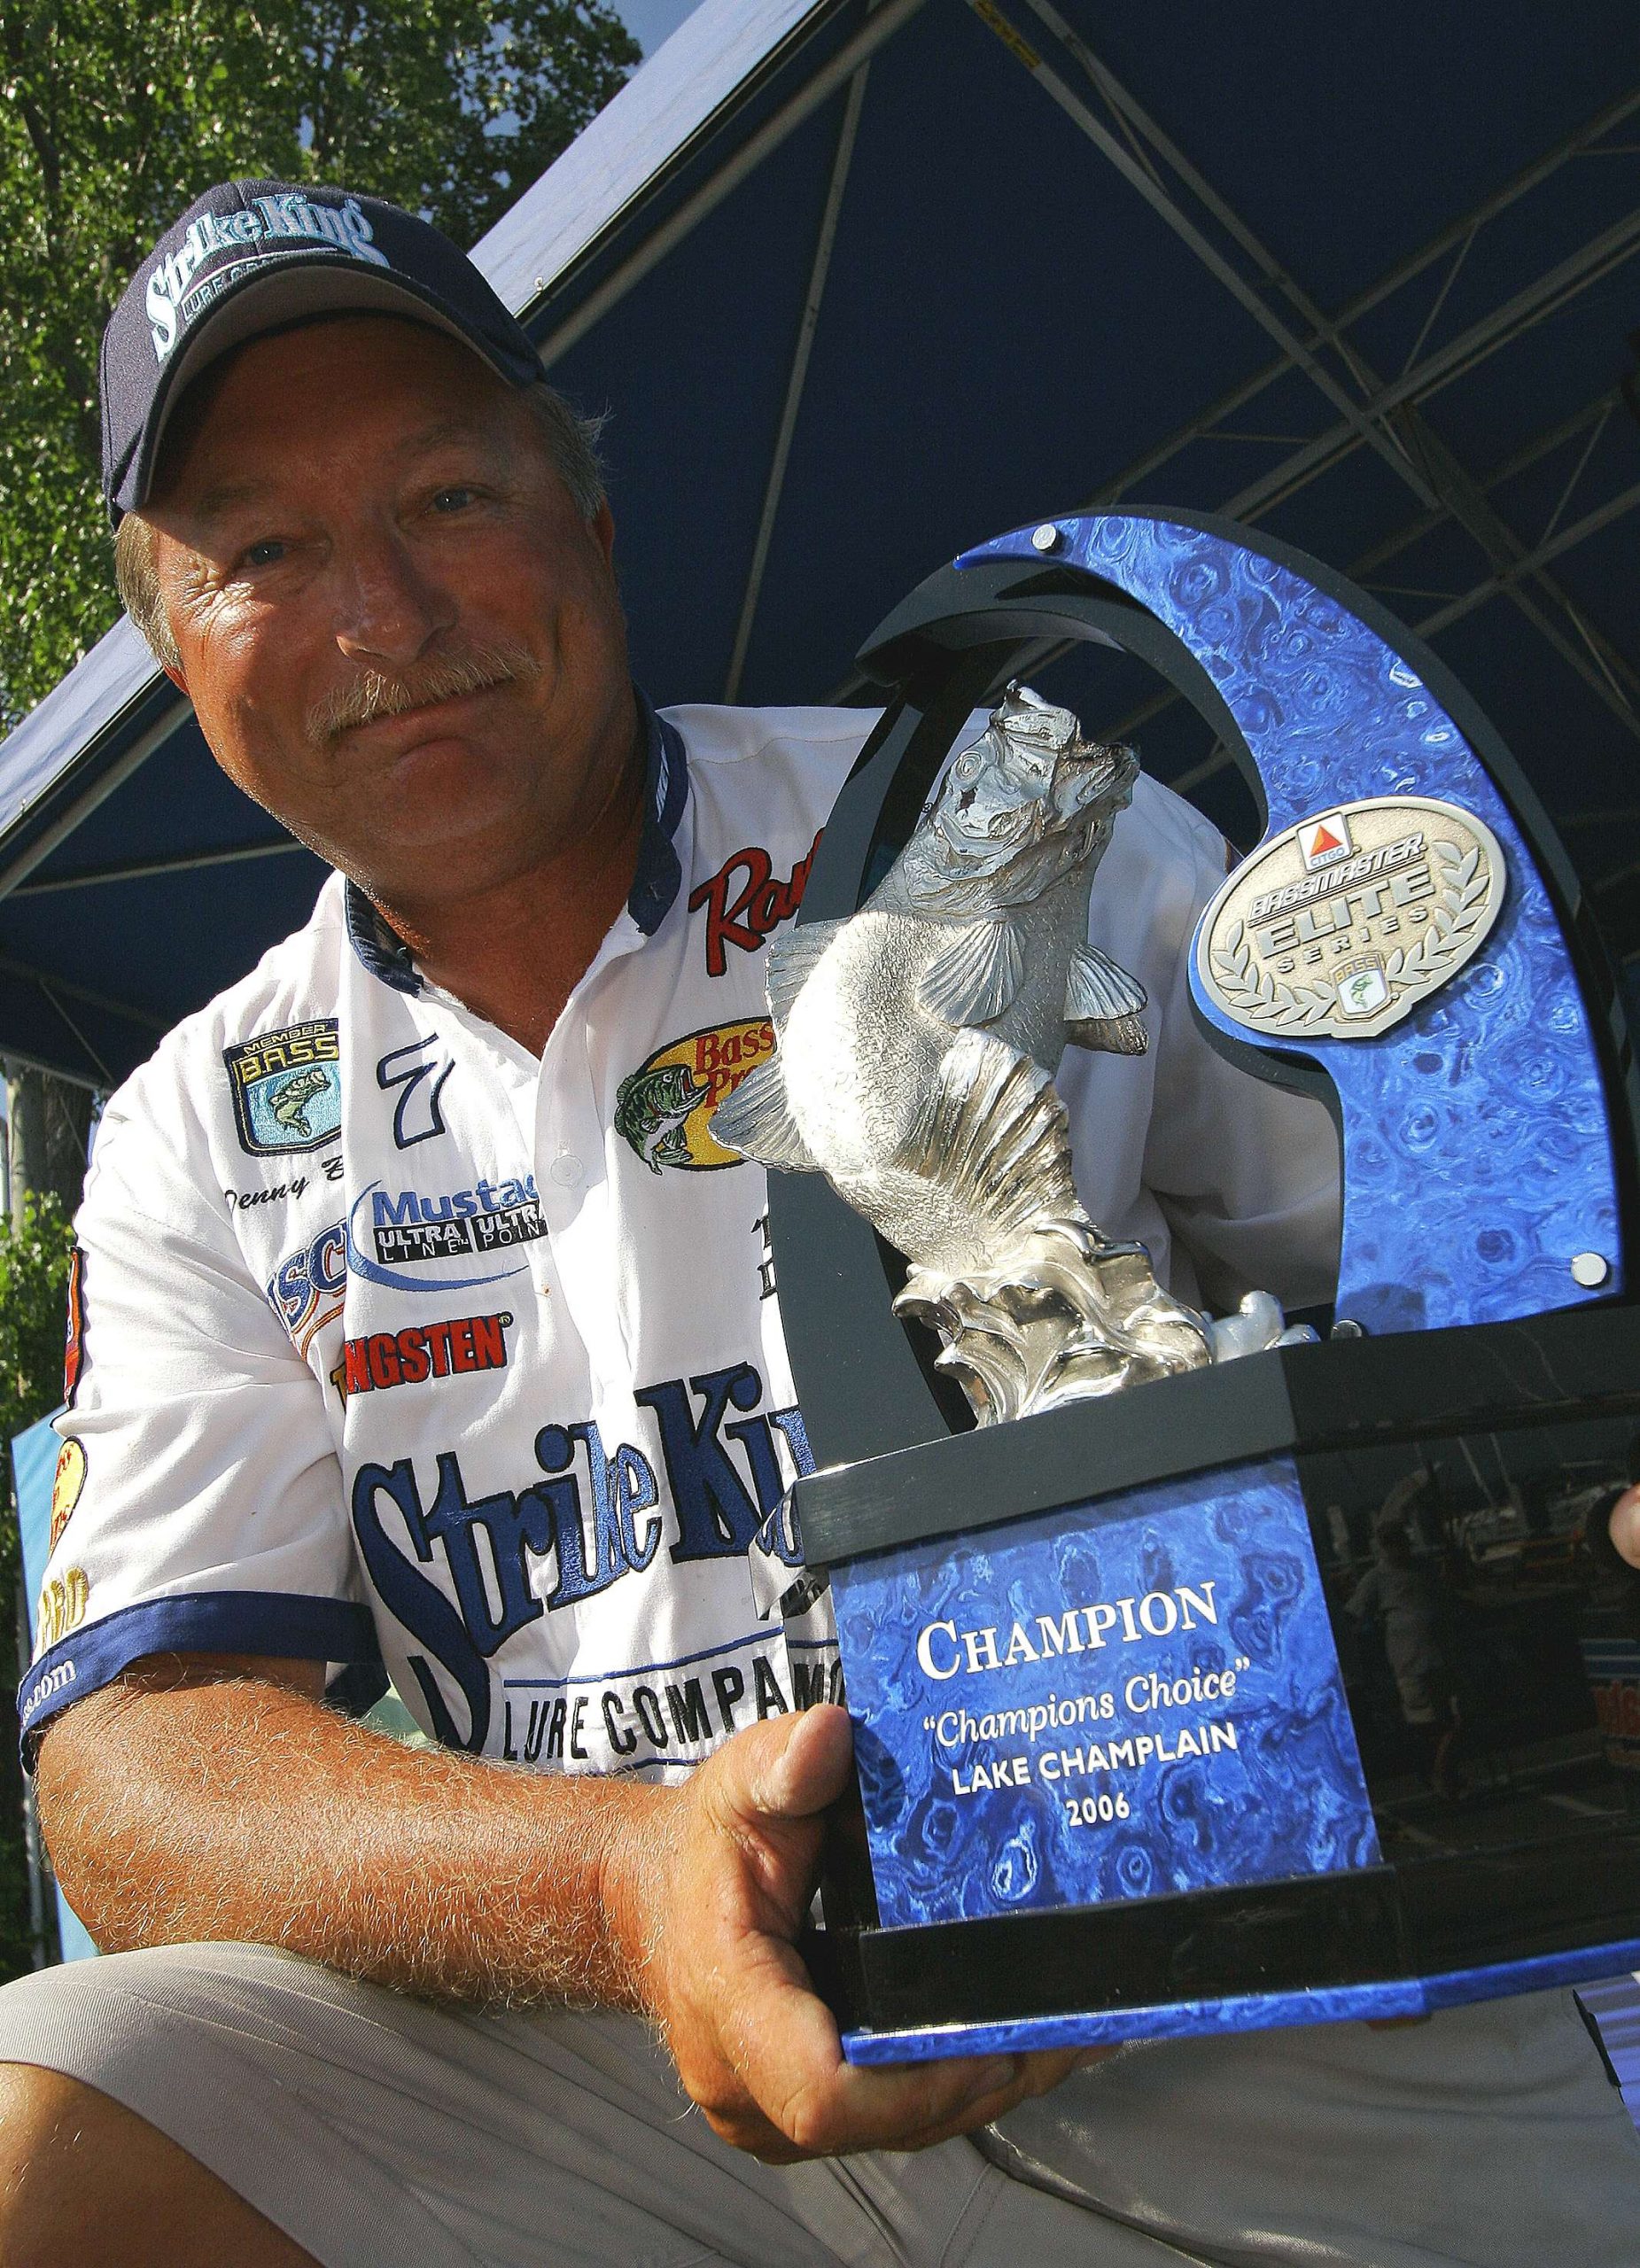 By winning, Brauer became the second angler to top $2 million in career earnings, and he took the B.A.S.S. all-time money lead back from Kevin VanDam. It was Brauerâs 16th of 17 victories.